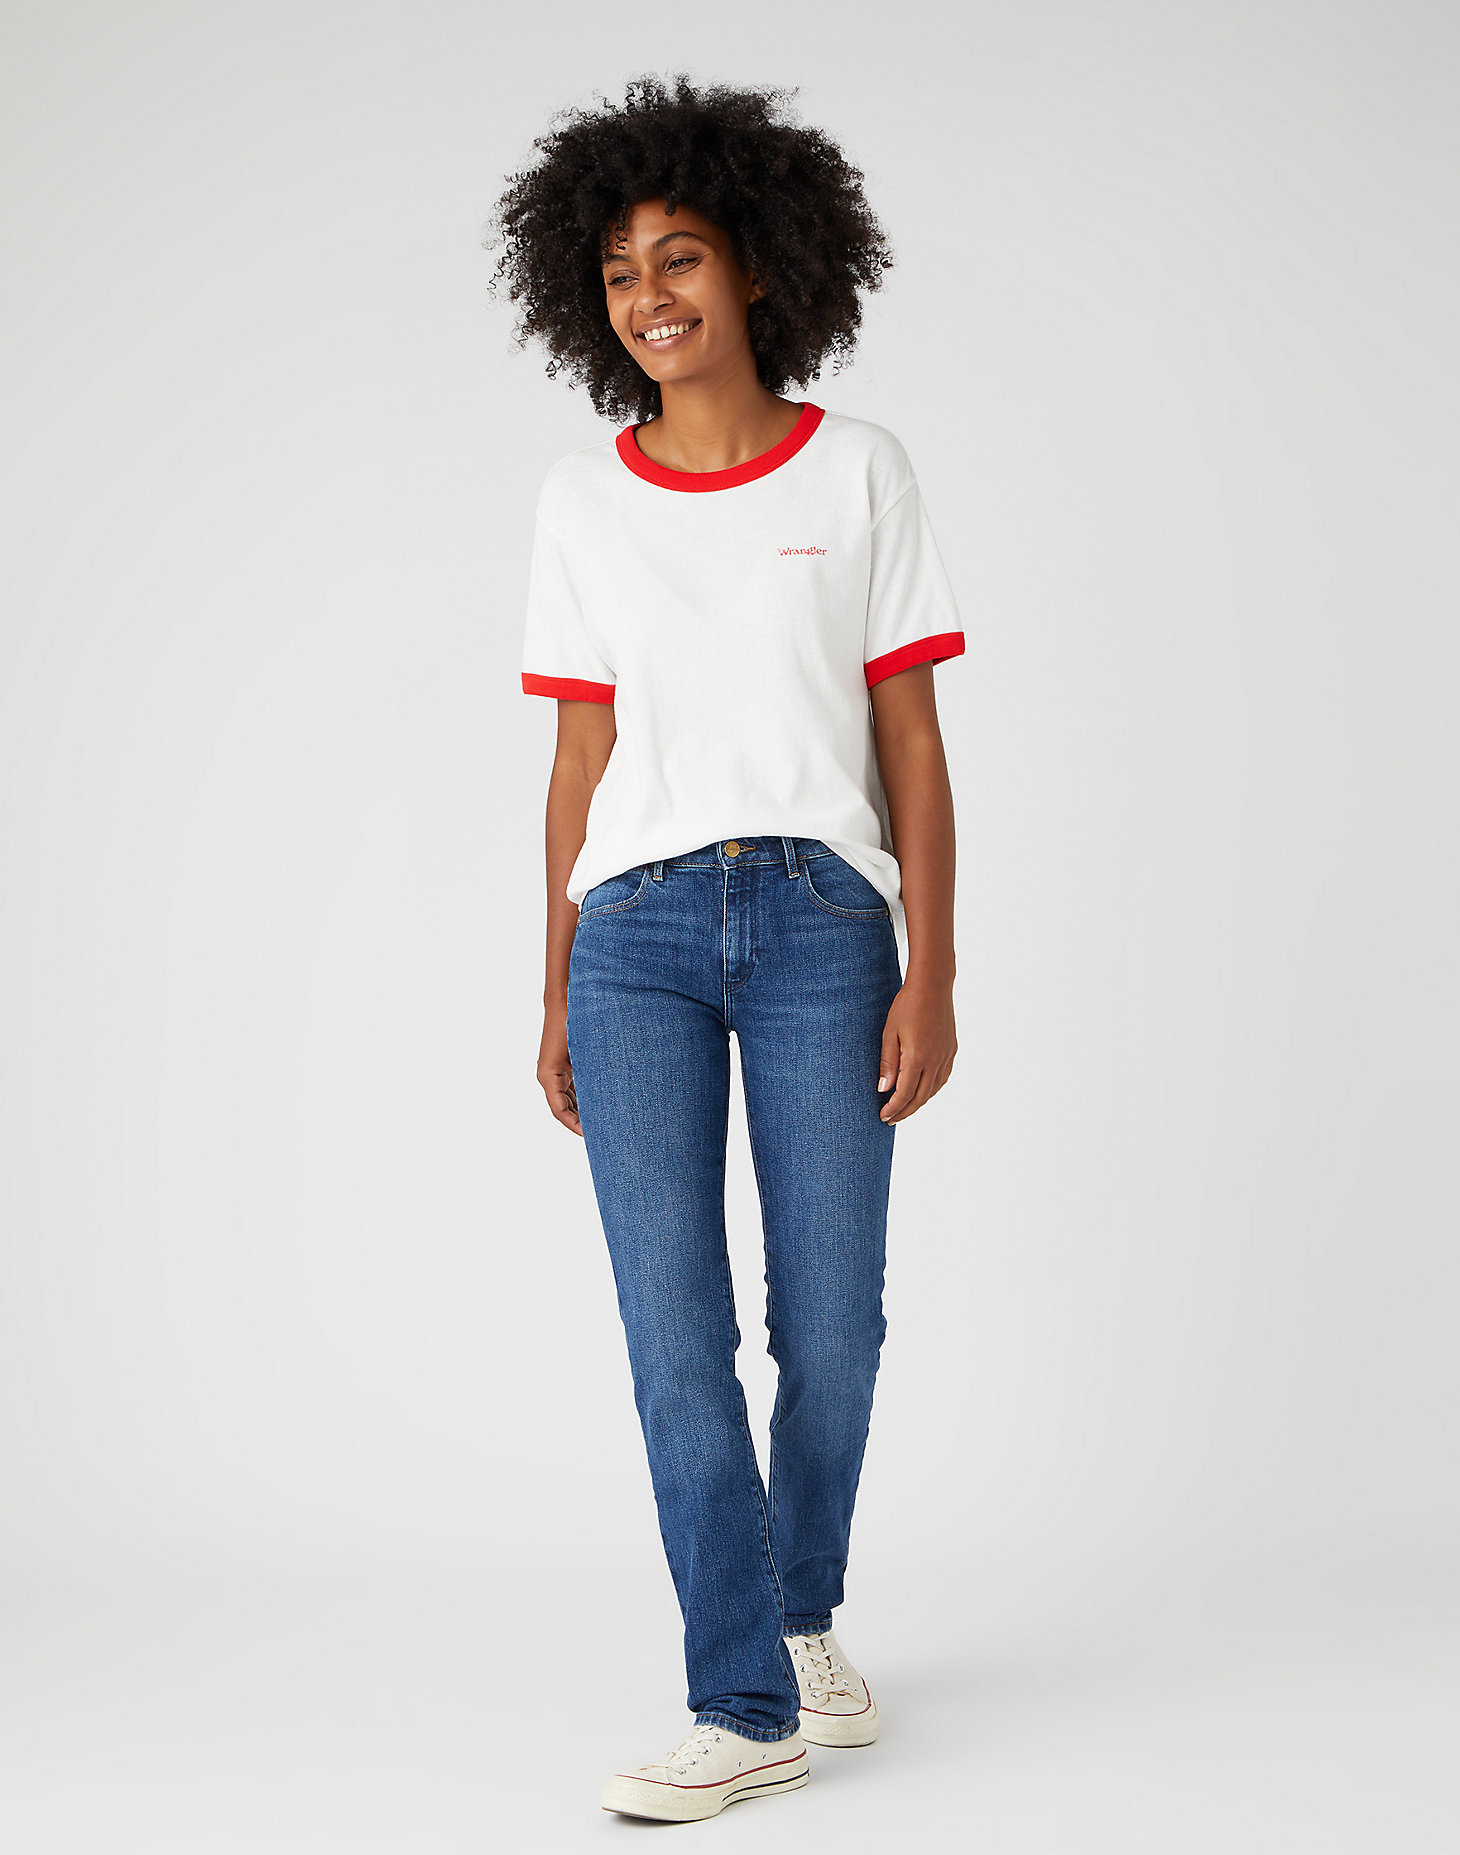 Relaxed Ringer Tee in Flame Red alternative view 1